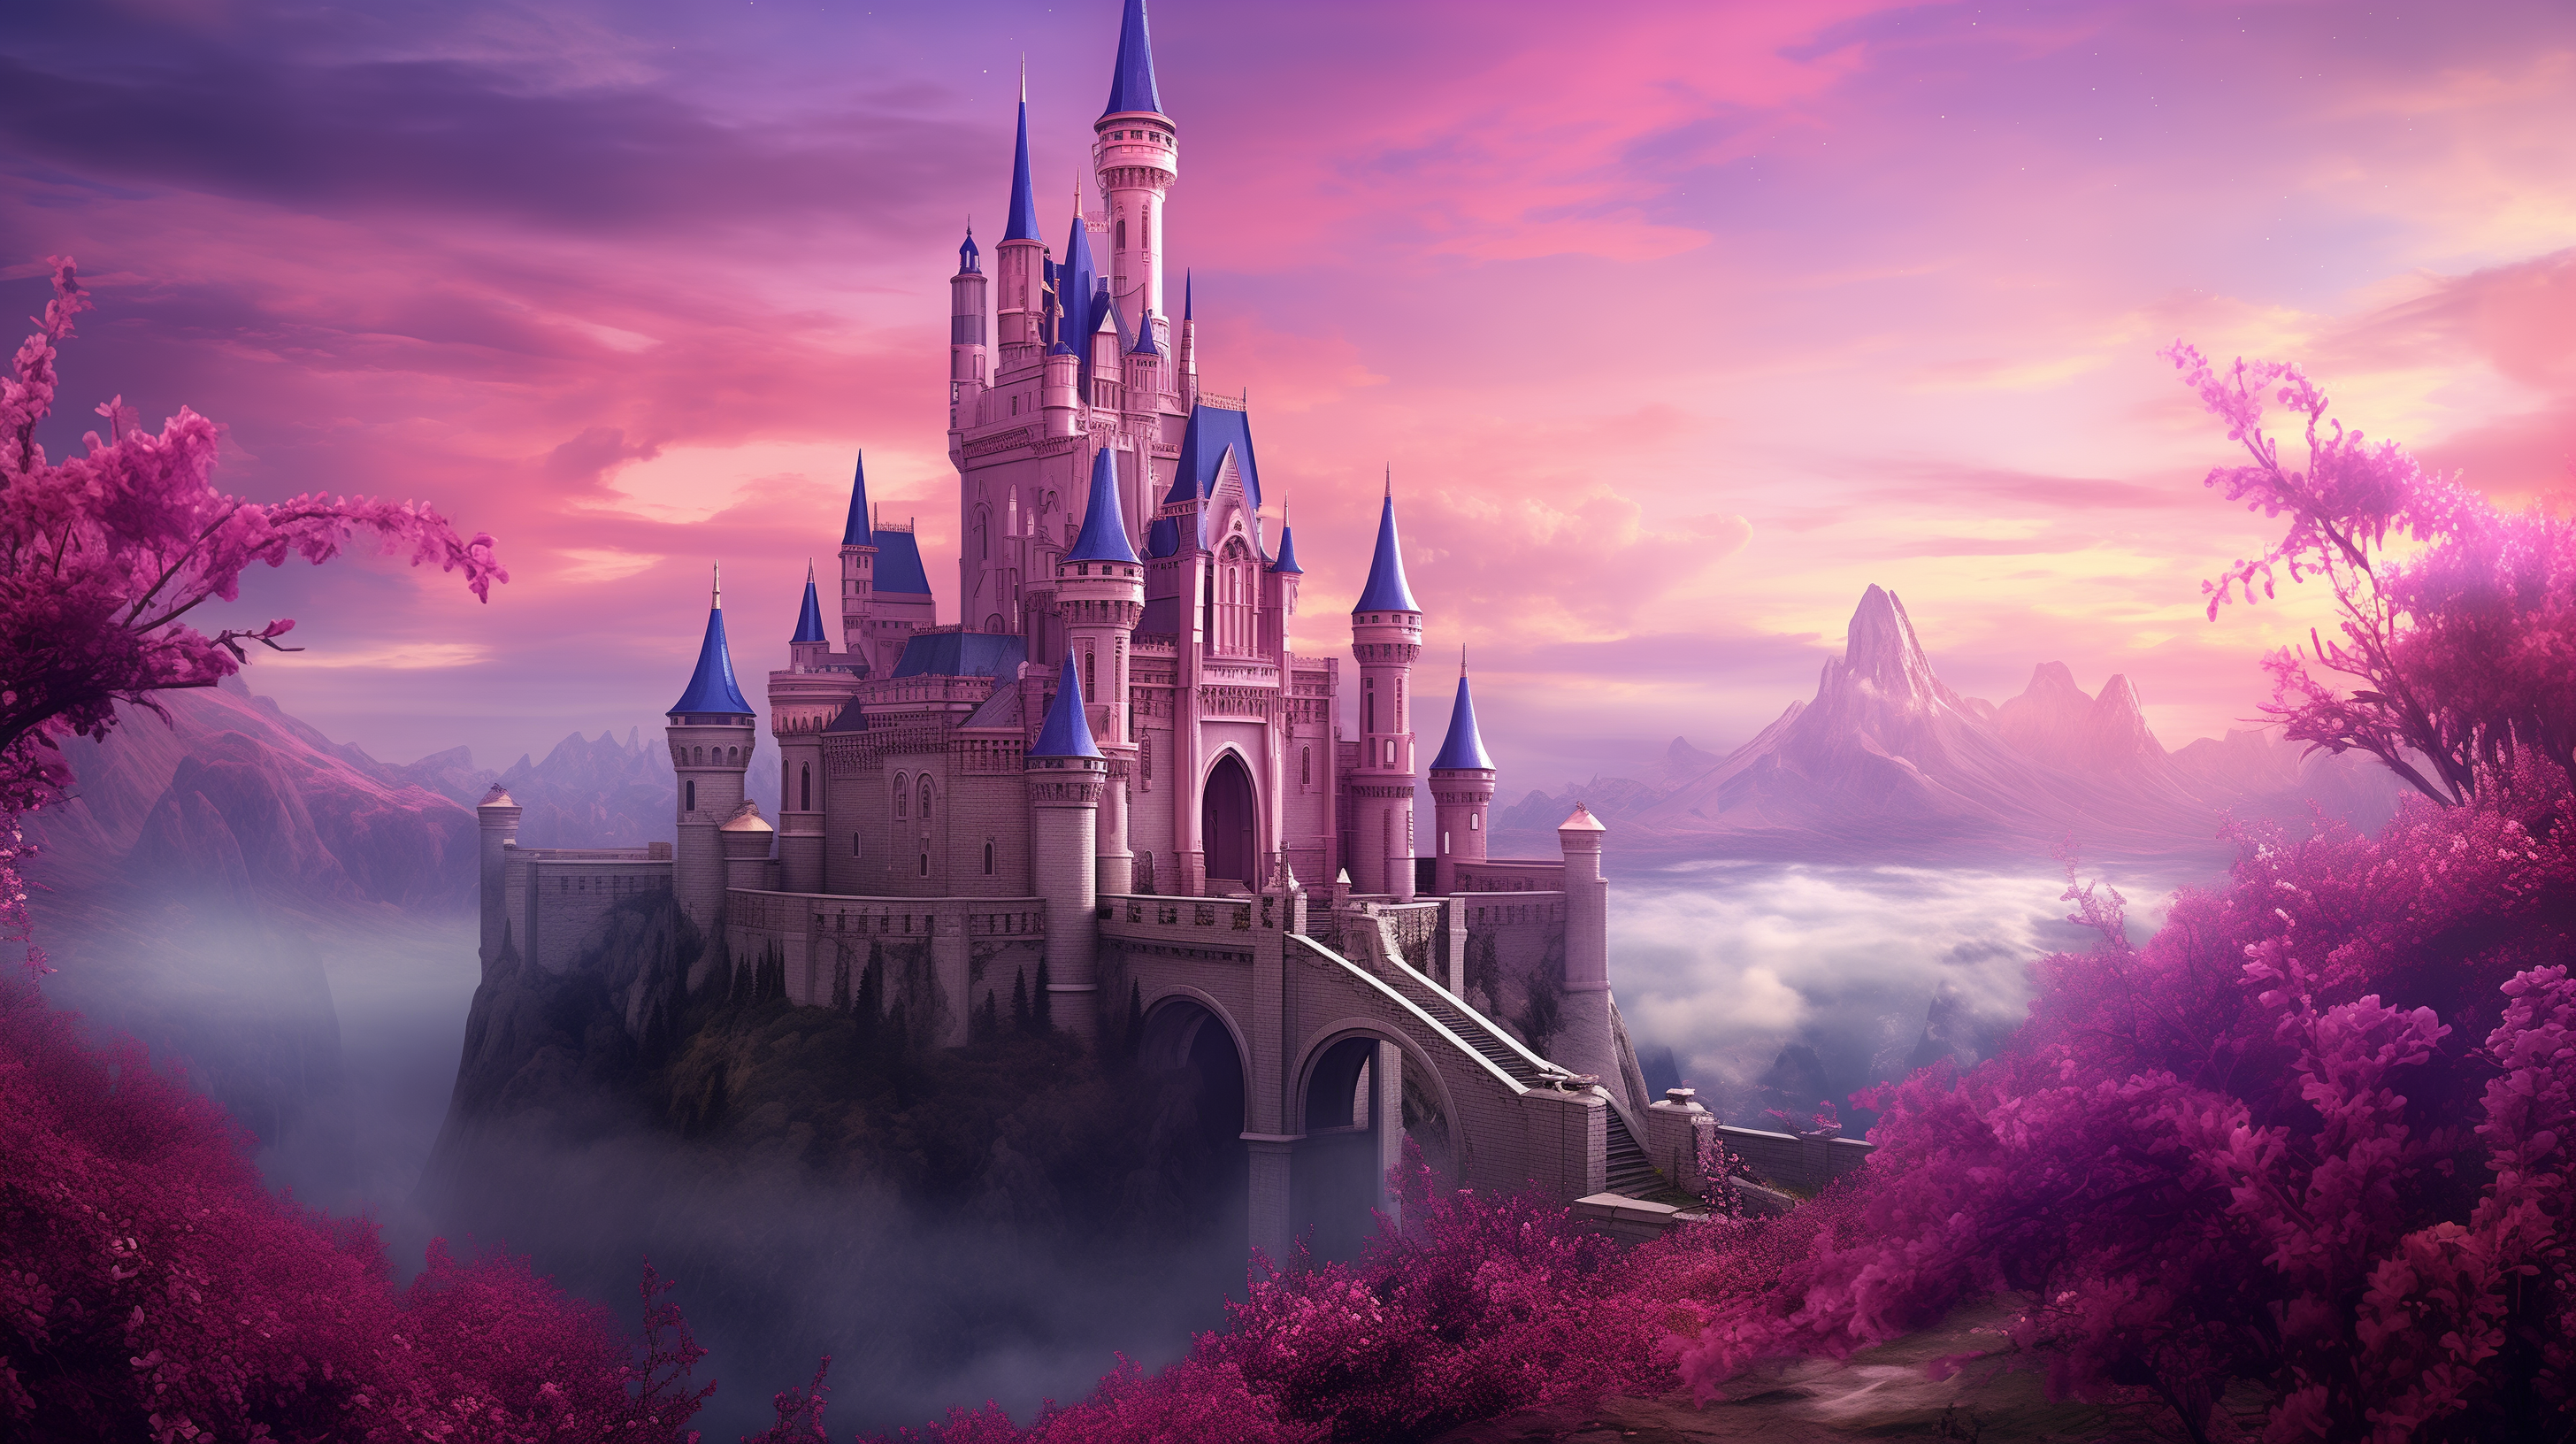 Enchanted fairy tale castle amidst a mystical pink forest with fog, available as an HD desktop wallpaper.